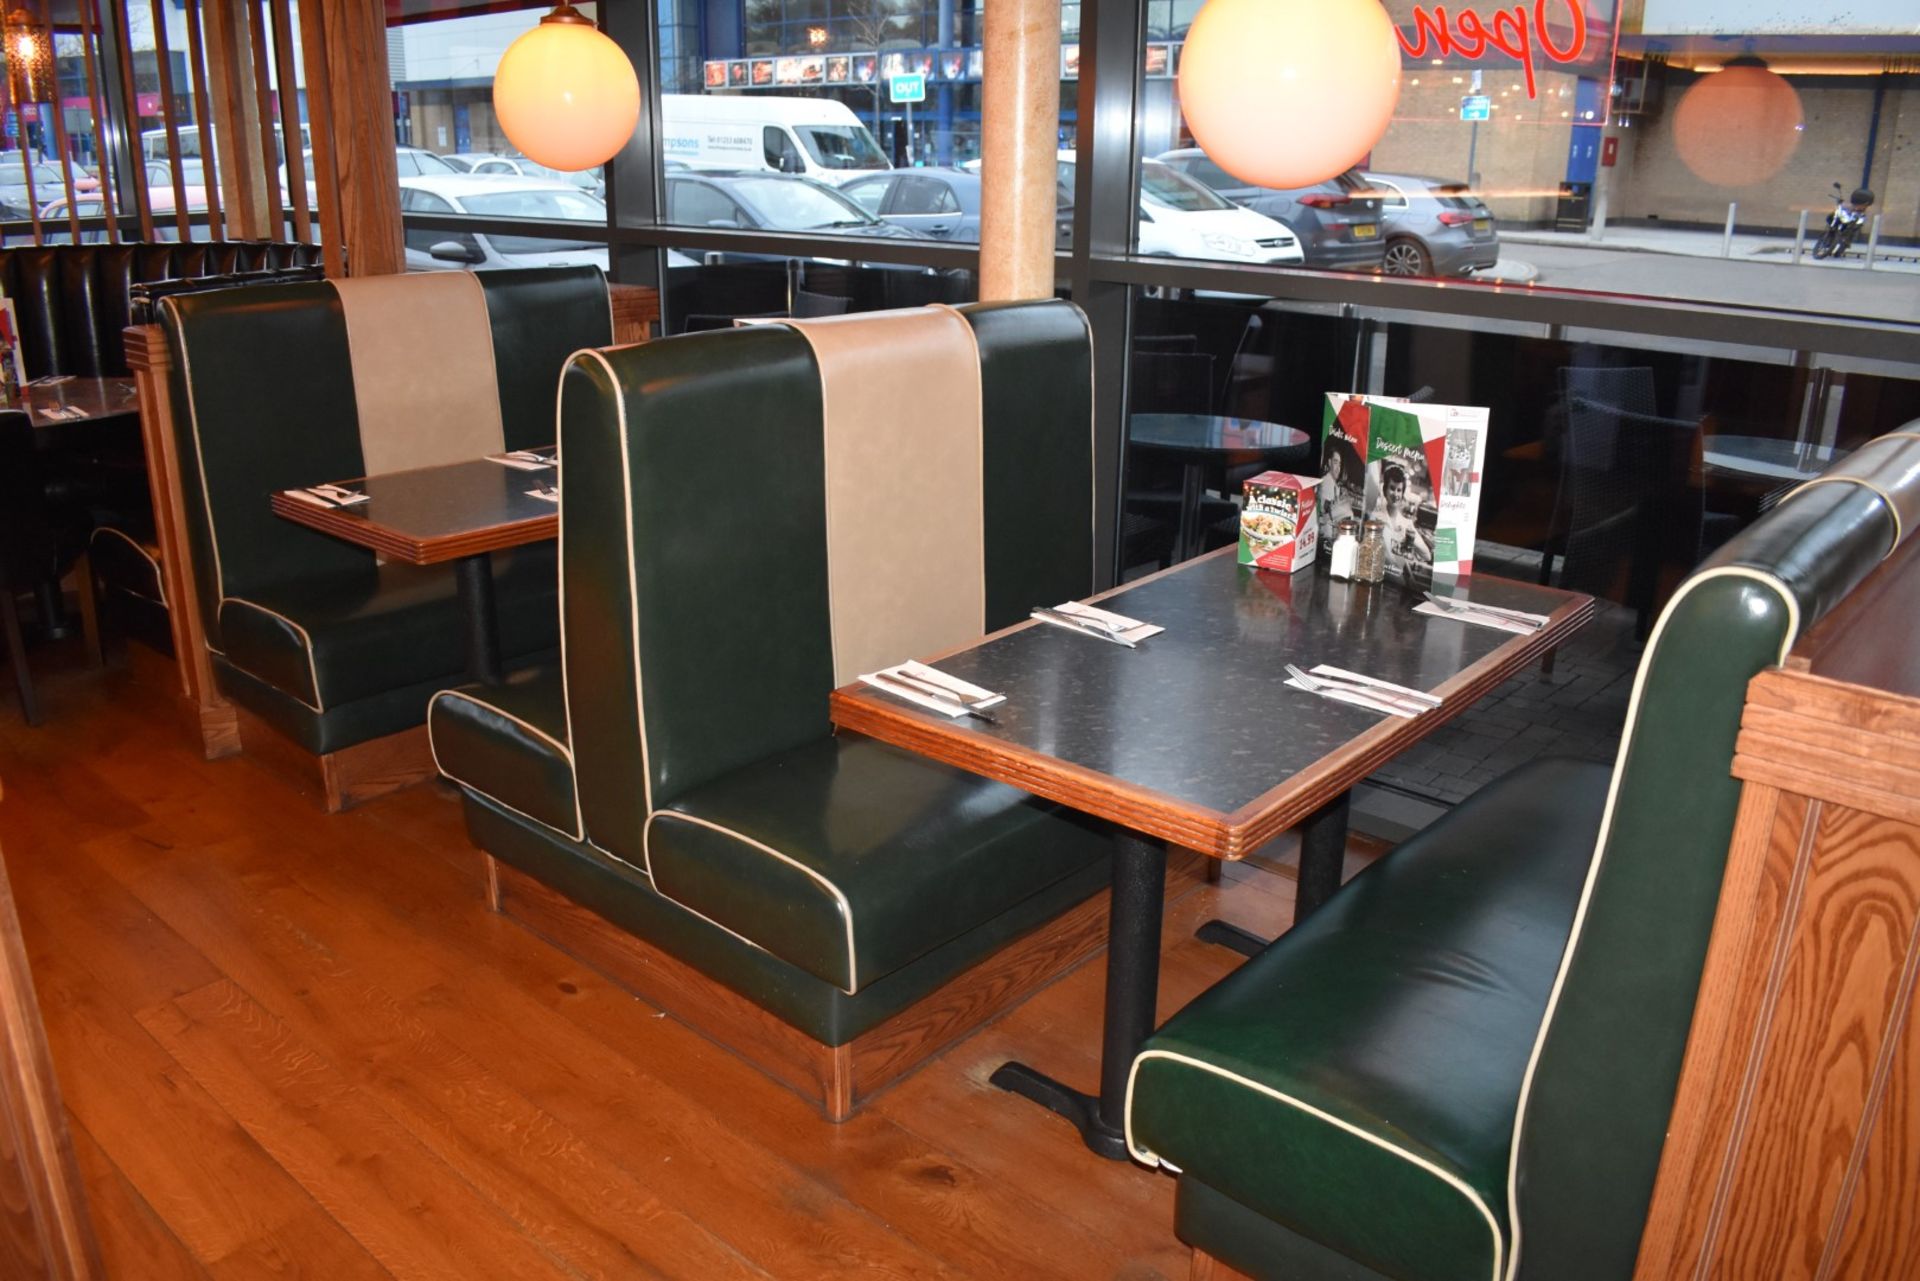 3 x Sections of Booth Seating - Upholstered in a Green and Cream Retro Style Faux Leather Upholstery - Image 5 of 6